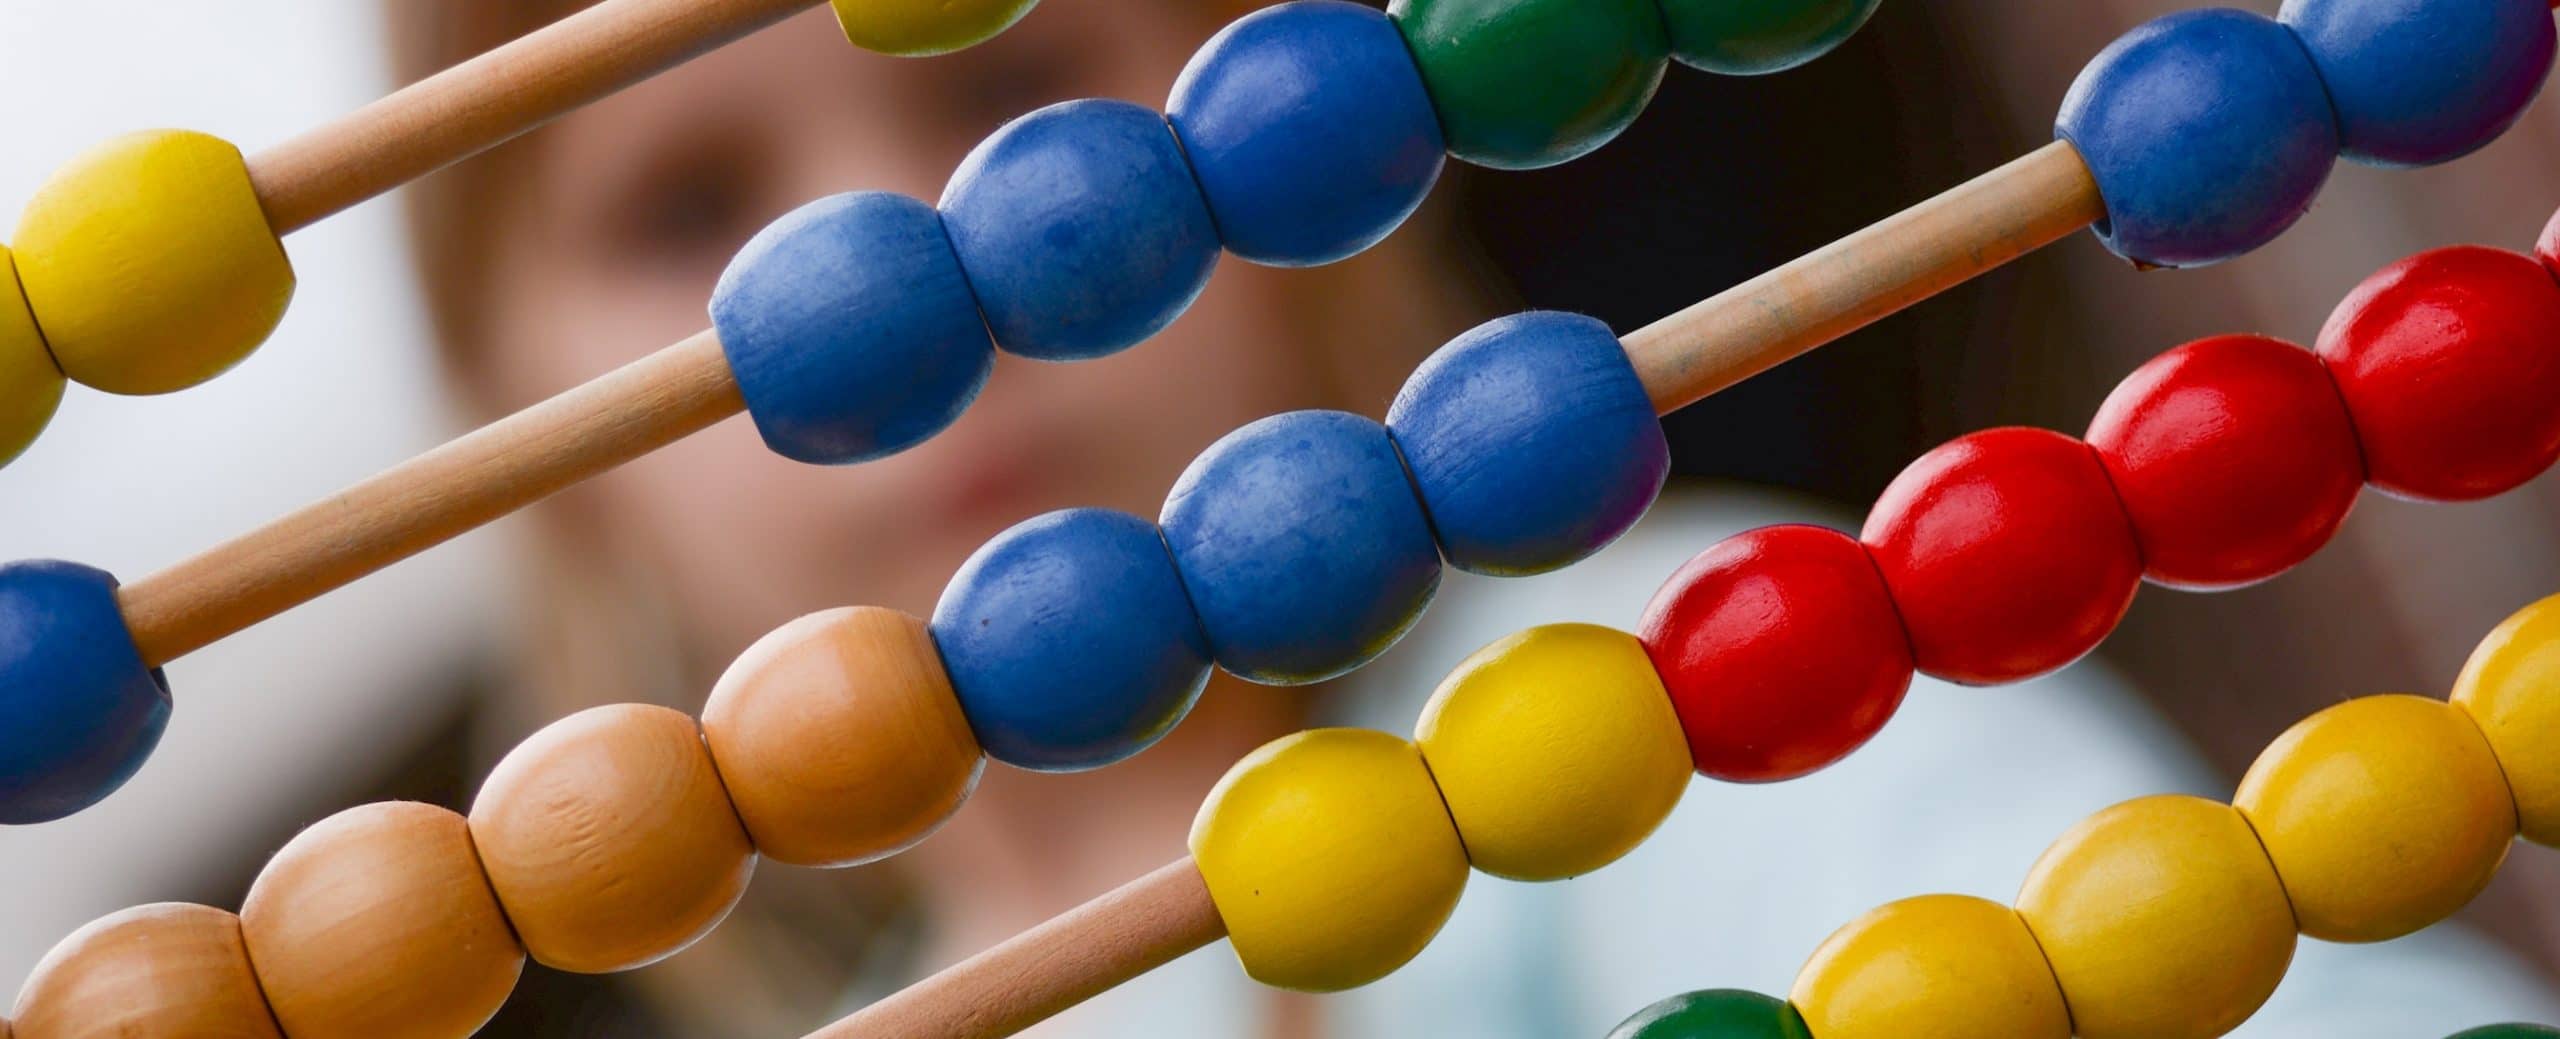 multicolored abacus photography 1019470 scaled